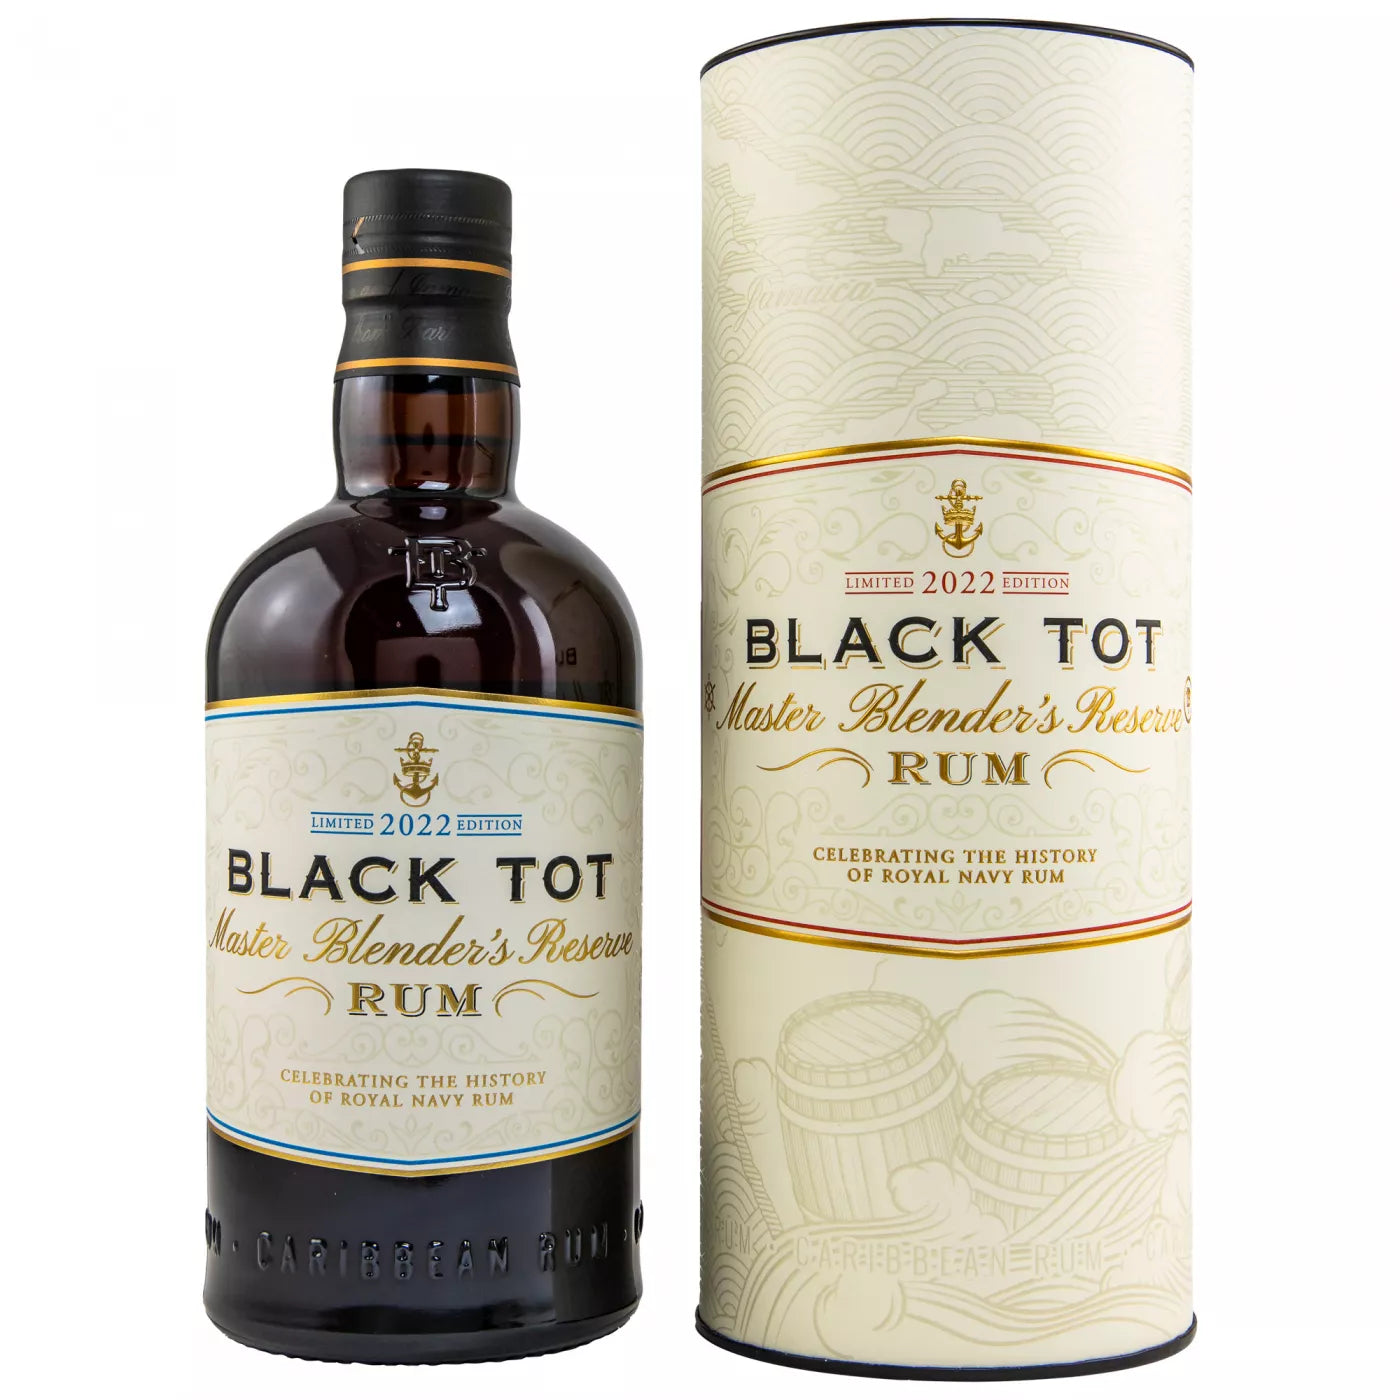 Black Tot Master Blender's Reserve Rum Limited Edition 2022 54,5% Vol. 0,7l in Giftbox